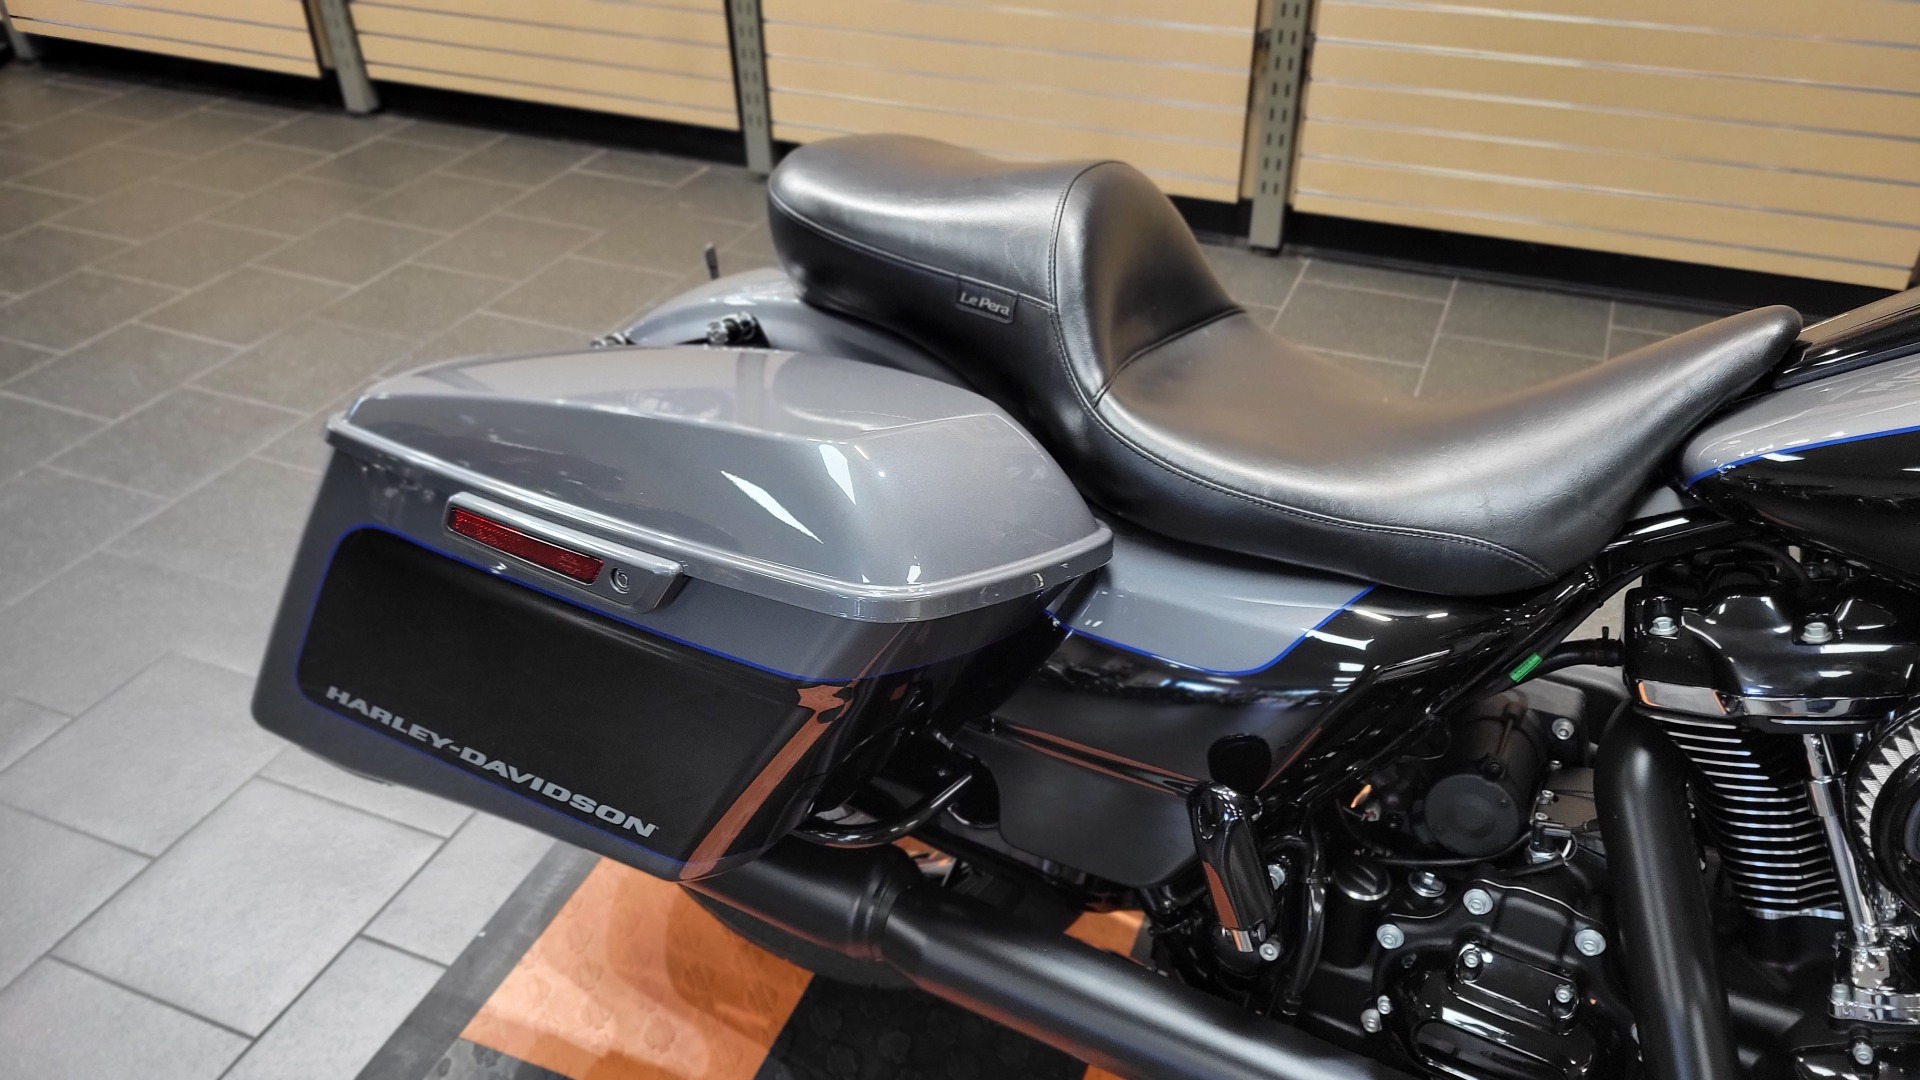 2021 Harley-Davidson Street Glide® Special in The Woodlands, Texas - Photo 6